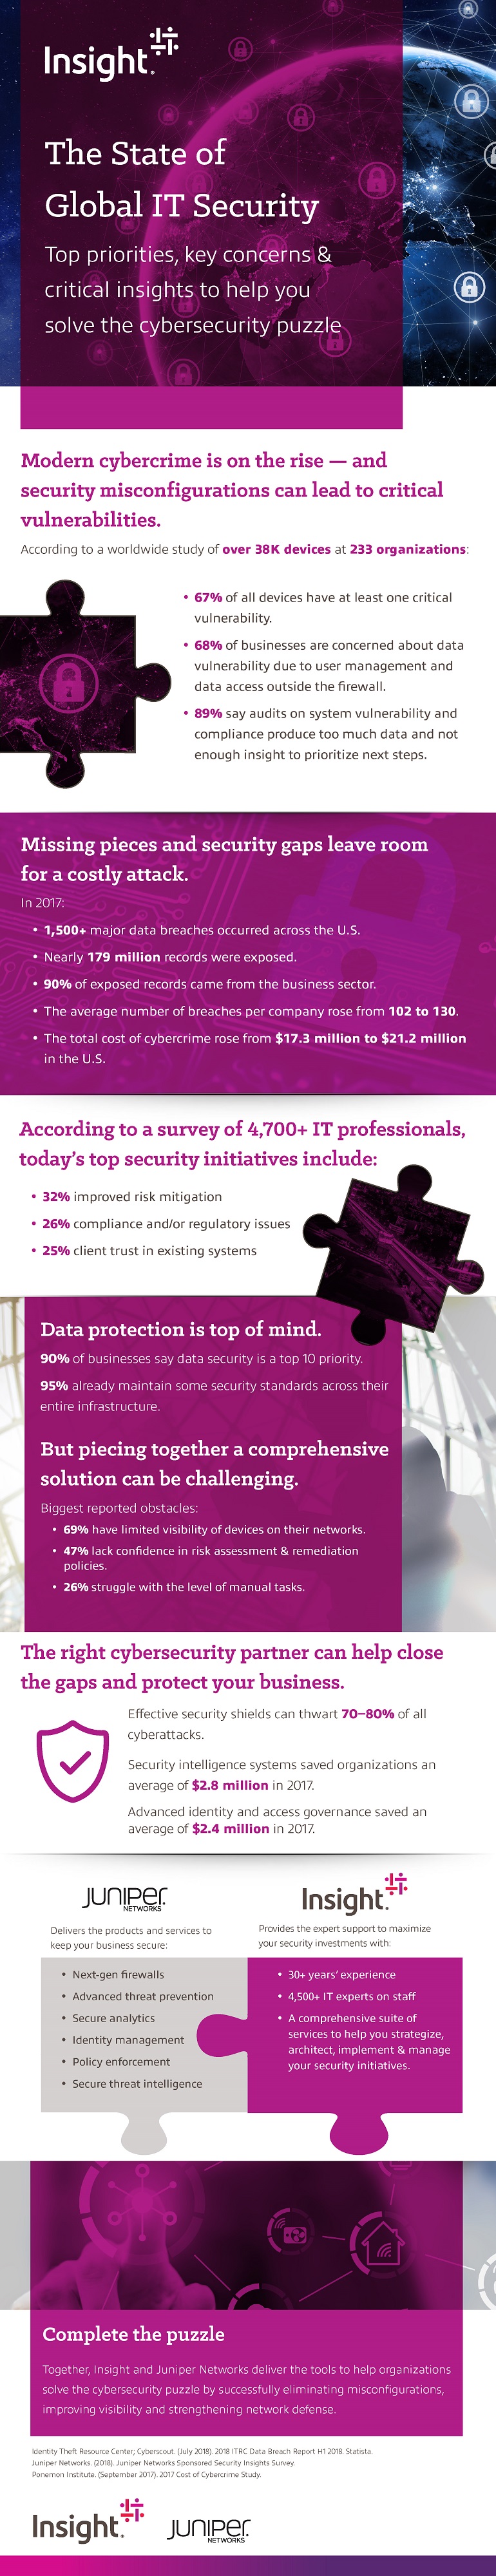 Article The State of Global IT Security Infographic Image